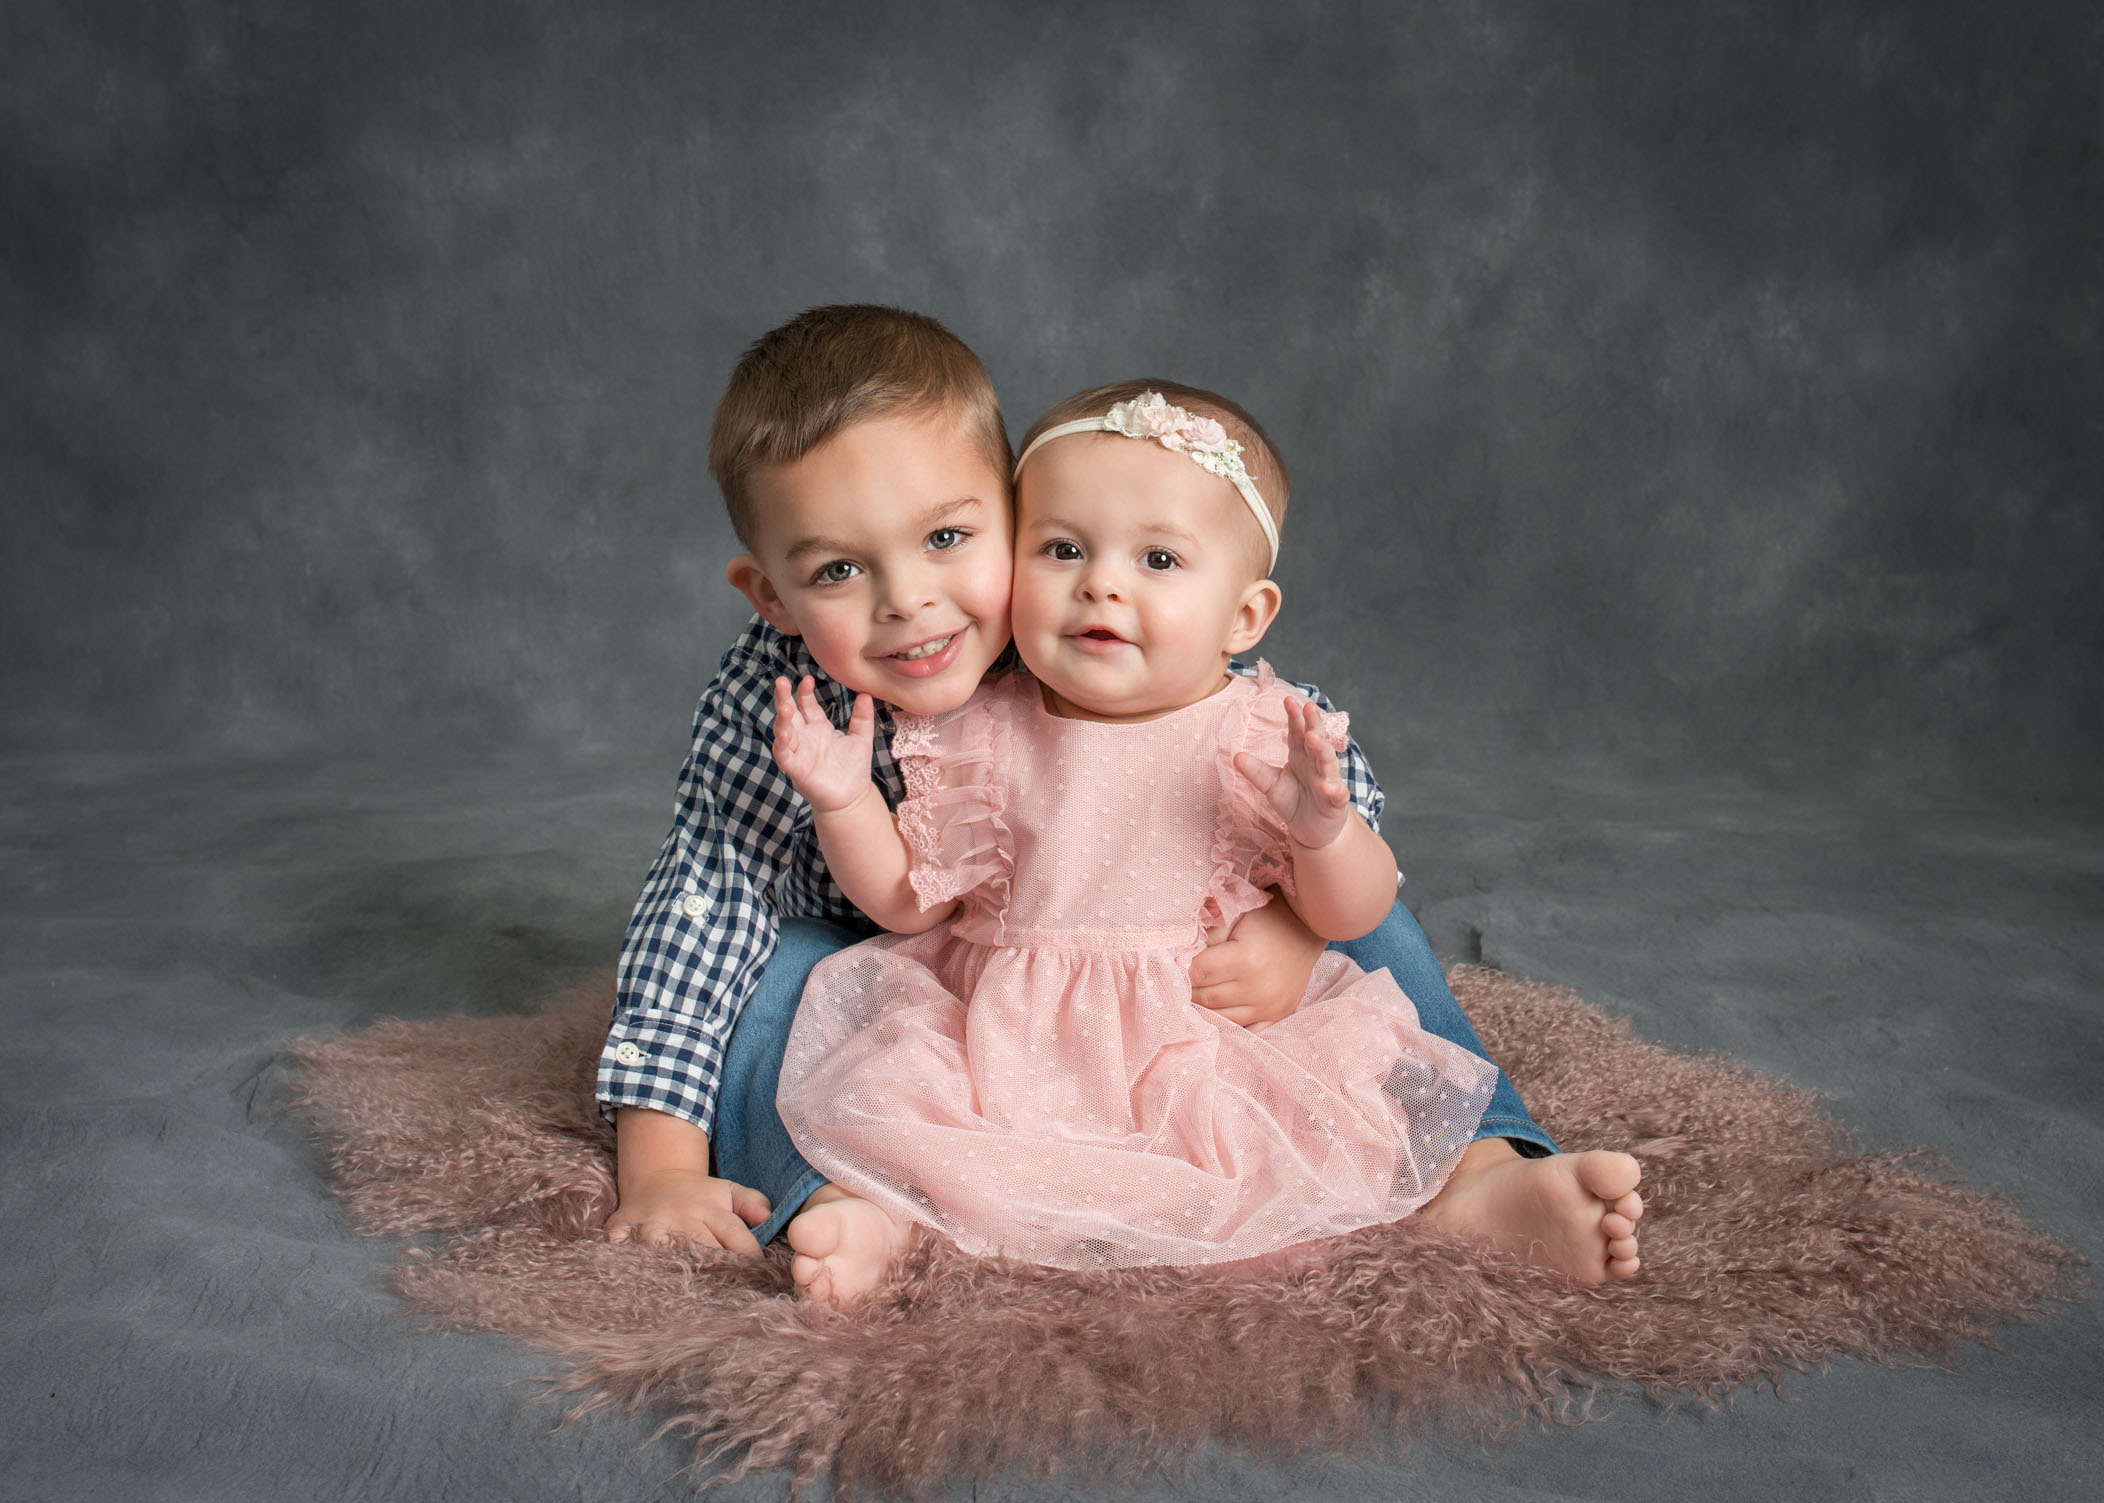 6 month old baby girl sitting on pink fur with 3 year old brother hugging her from behind and smiling